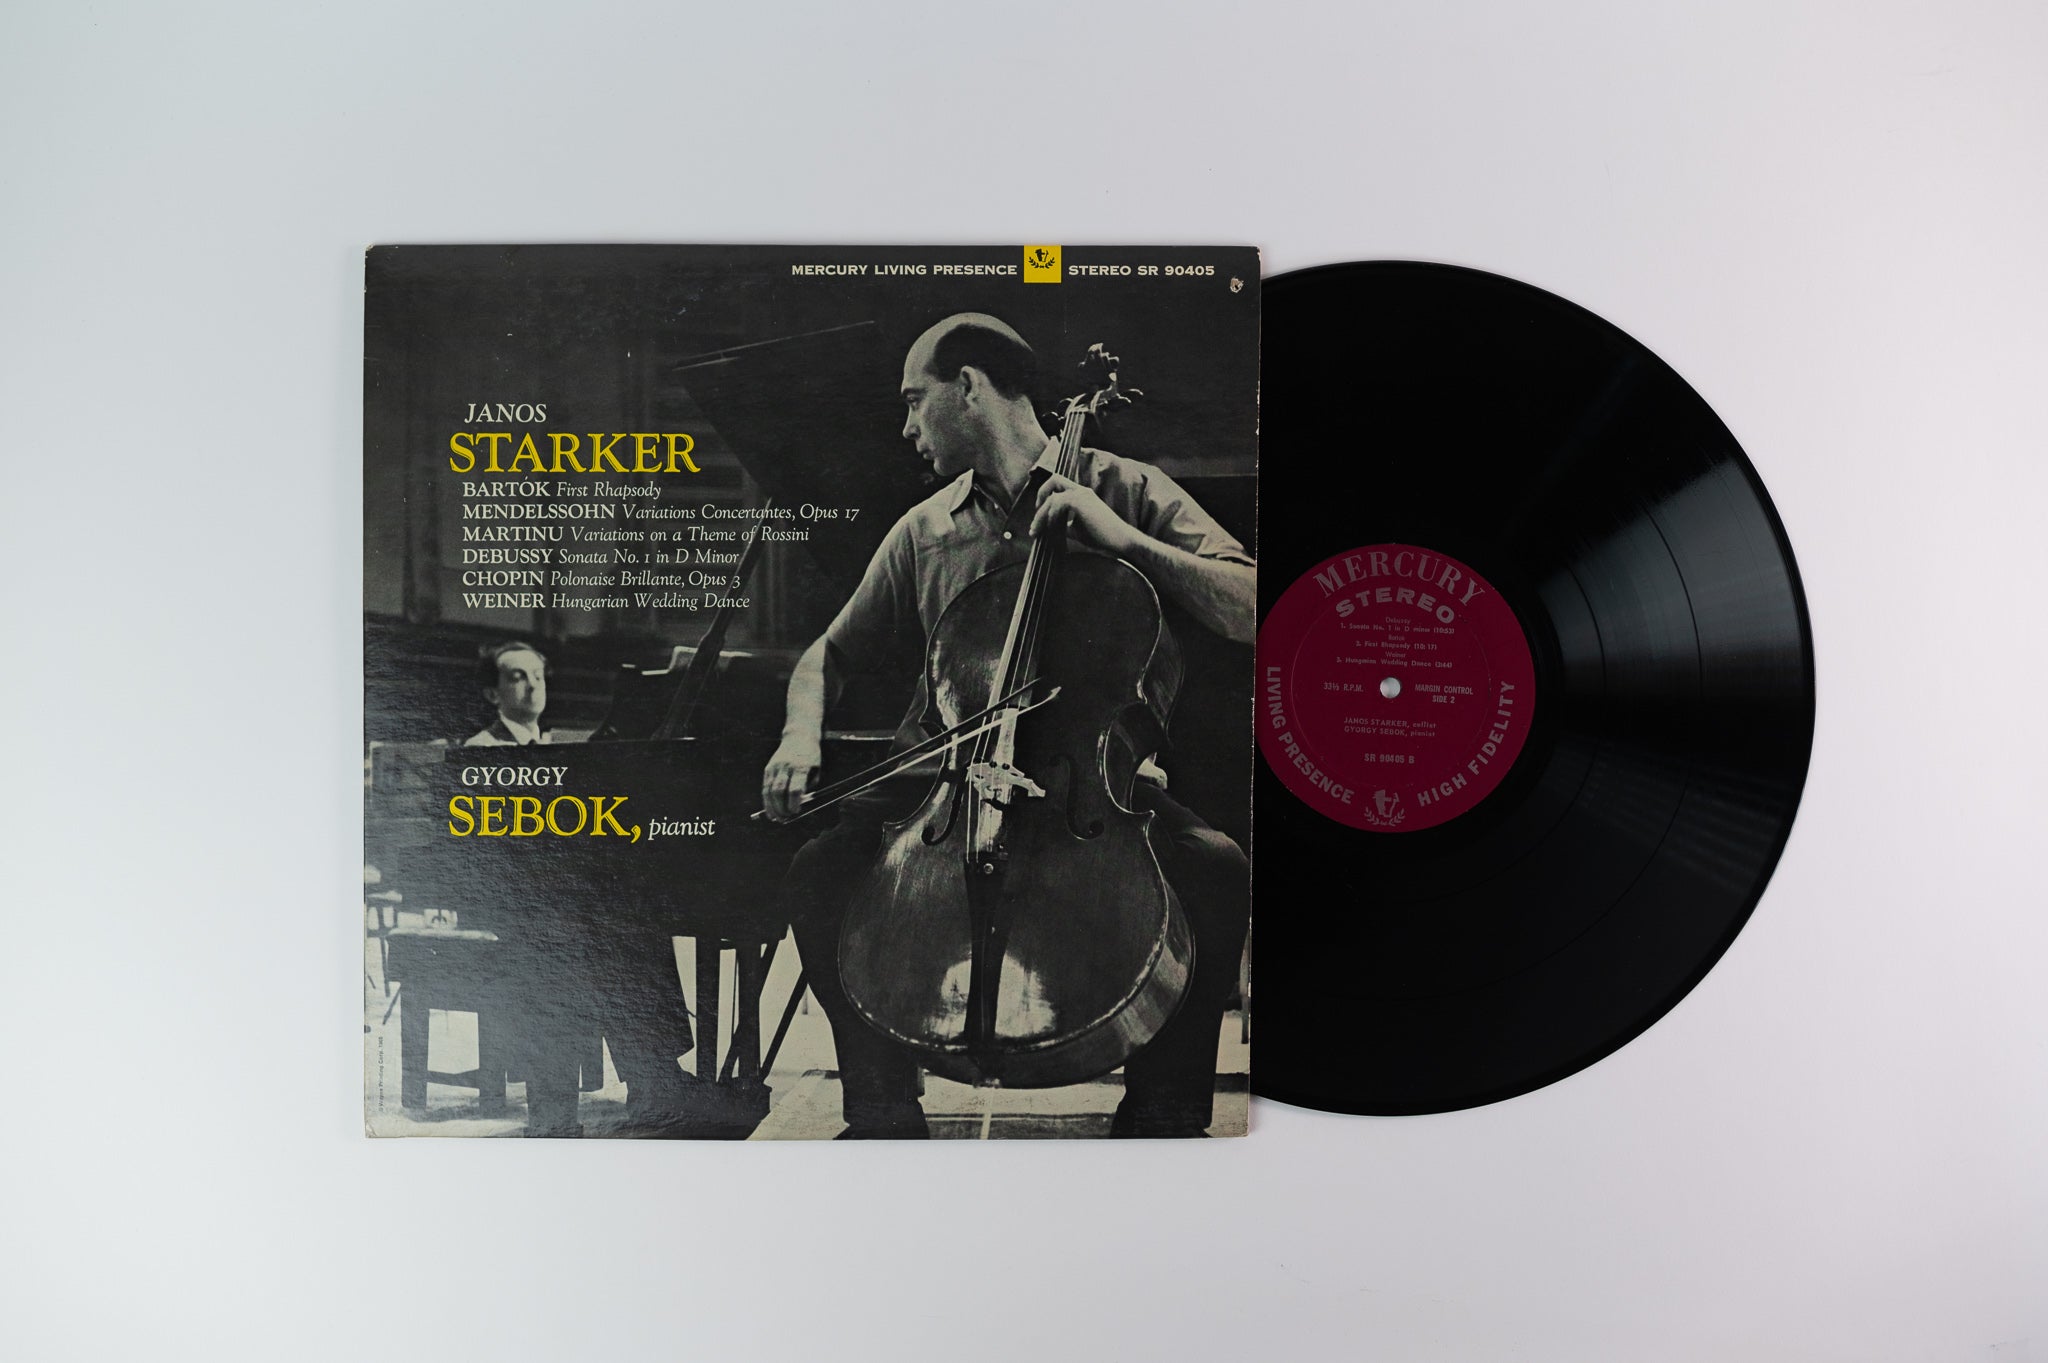 Janos Starker - Janos Starker Plays Works By Debussy, Bartók And Others on Mercury SR 90405 Stereo